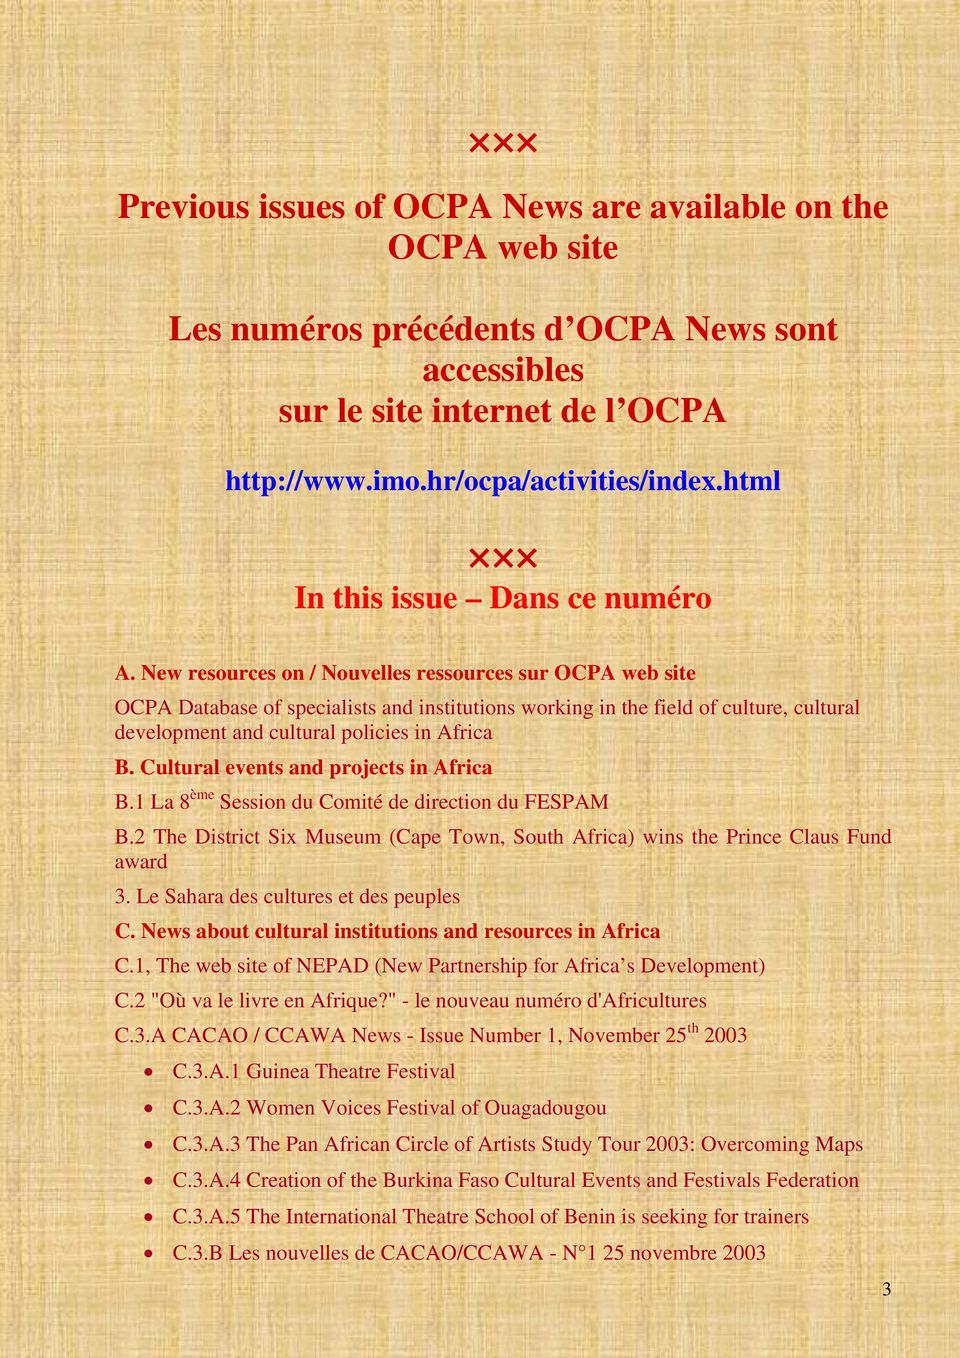 New resources on / Nouvelles ressources sur OCPA web site OCPA Database of specialists and institutions working in the field of culture, cultural development and cultural policies in Africa B.